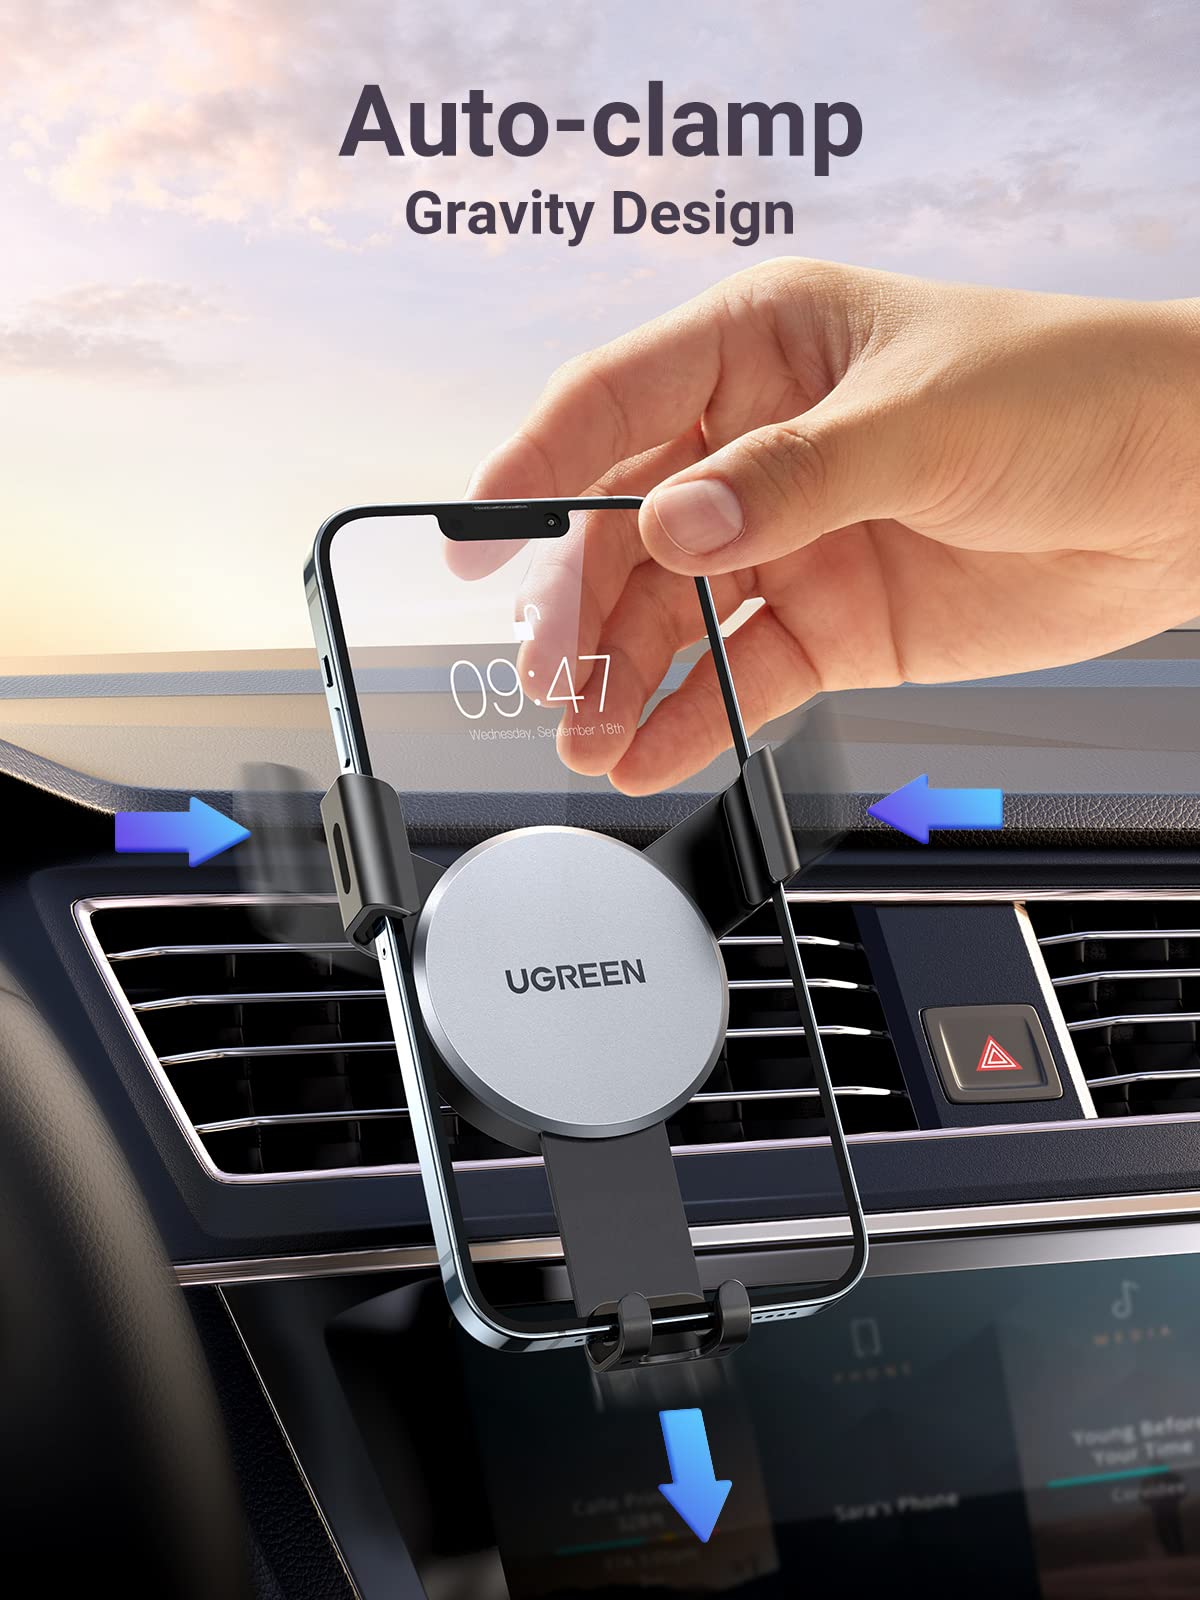 UGREEN Car Phone Holder, Mobile Holder for the Car Air Vent Phone Holder Stand Car Auto Lock Gravity Mobile Phone Mount Ac Vent Car Mount Compatible with iPhone 15/14/13 Series, S23/S22/S21 Z Flip 5 4